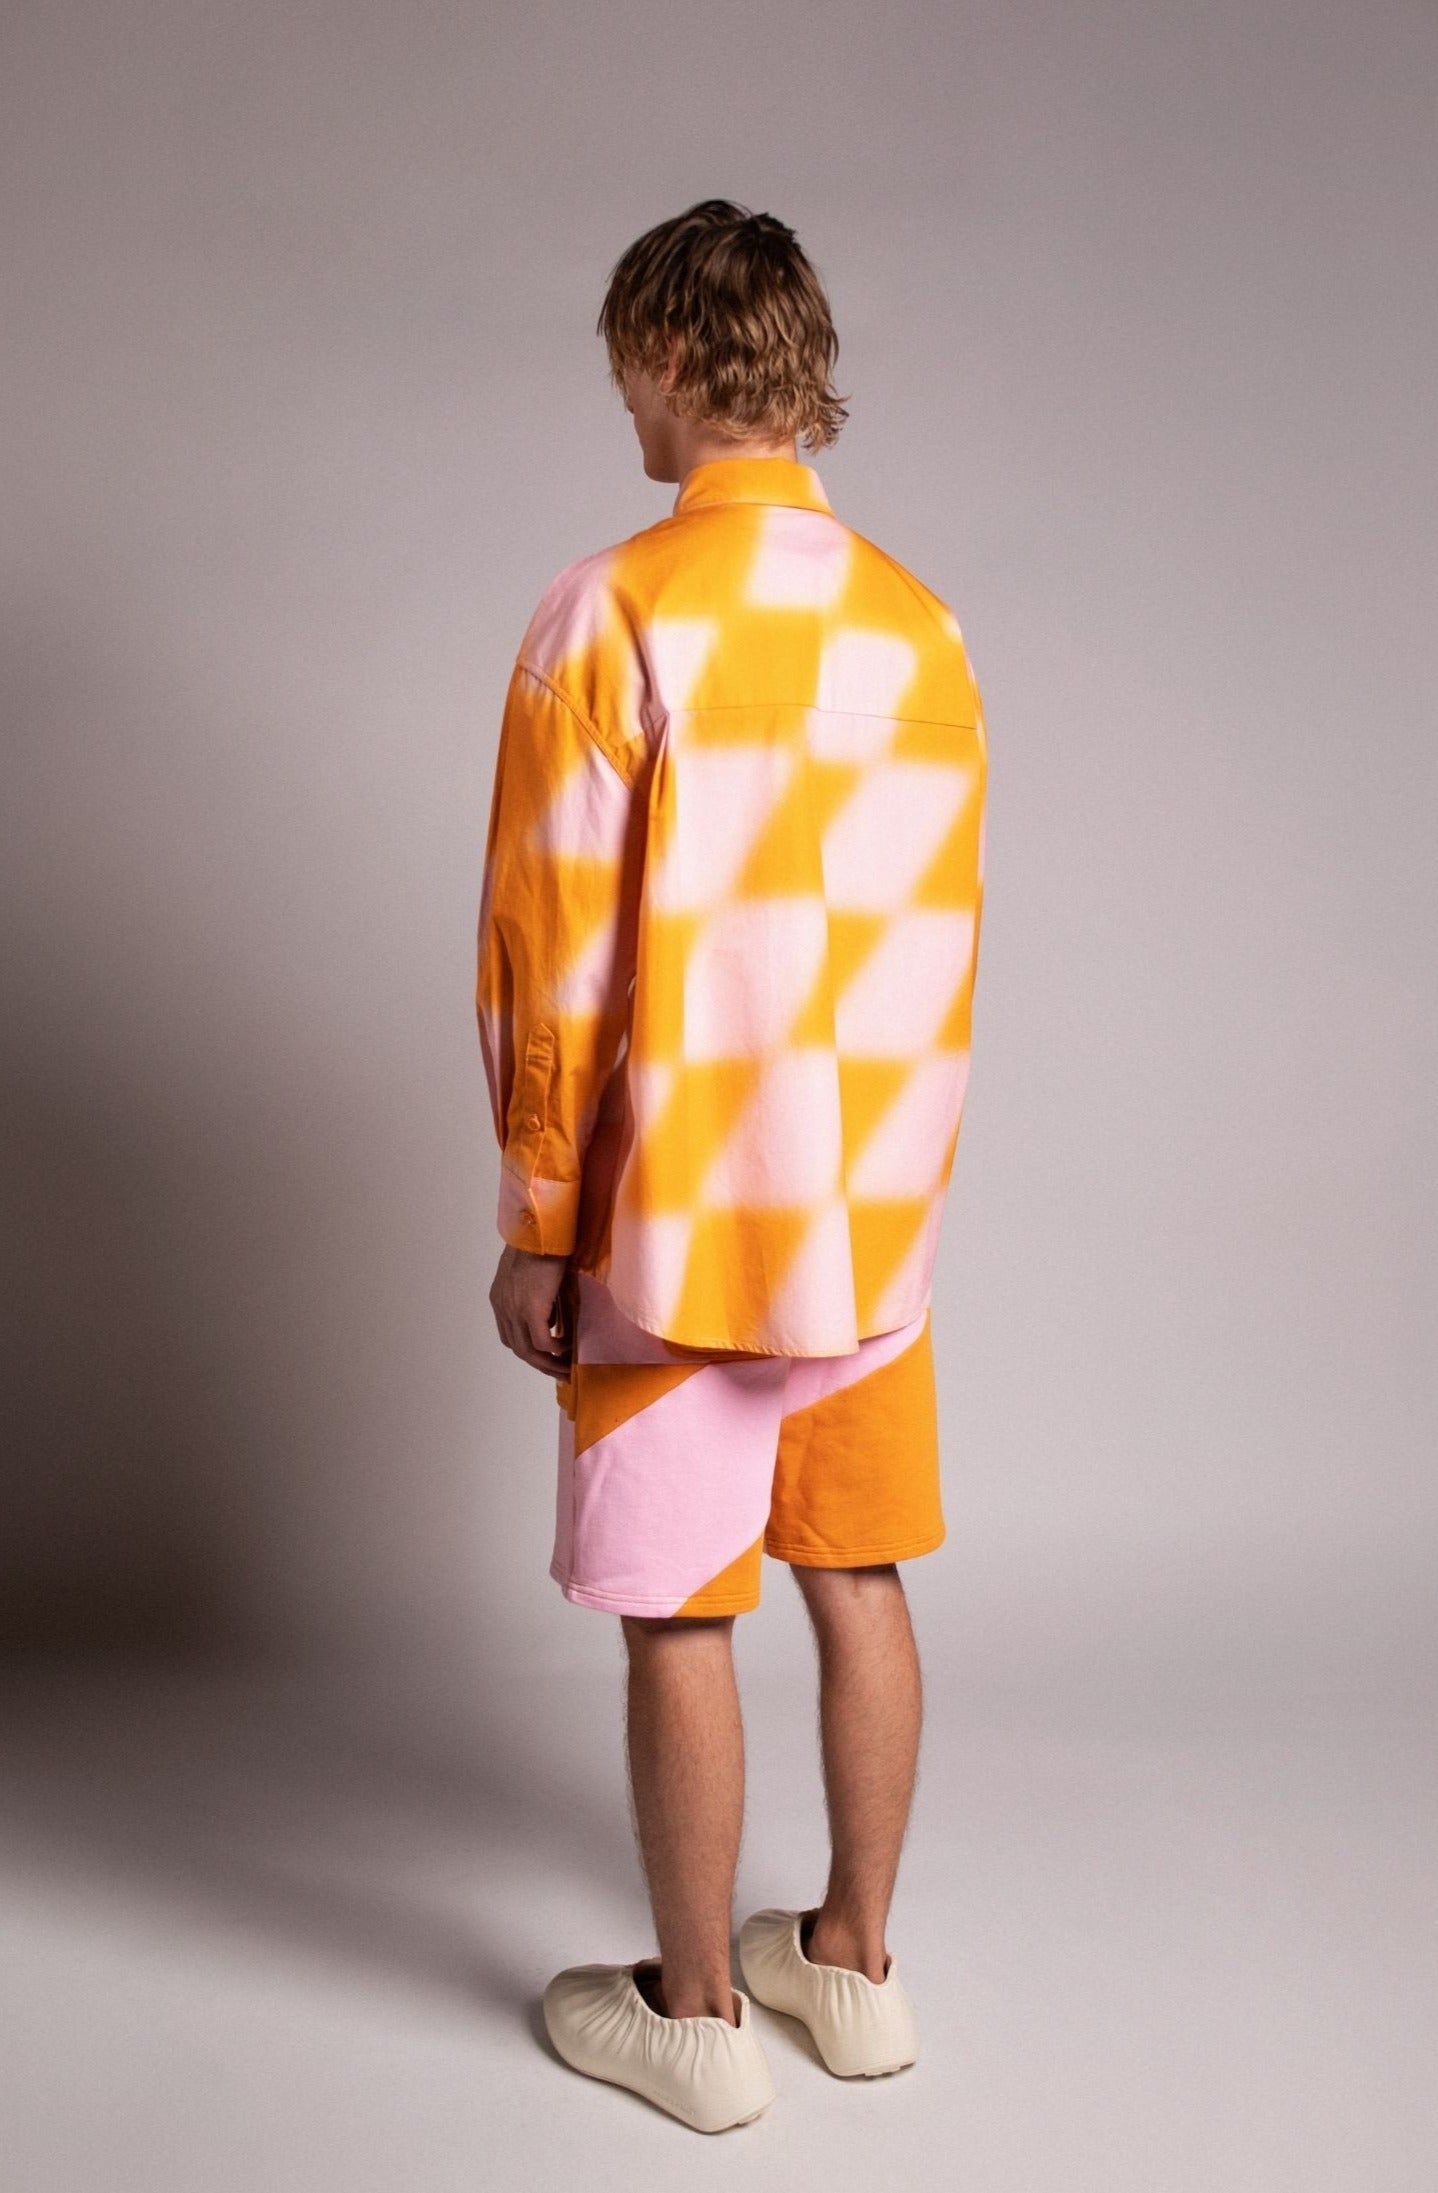 PRIVATE POLICY - Dove Pxl Checker Long-sleeve Shirt at DOORS NYC